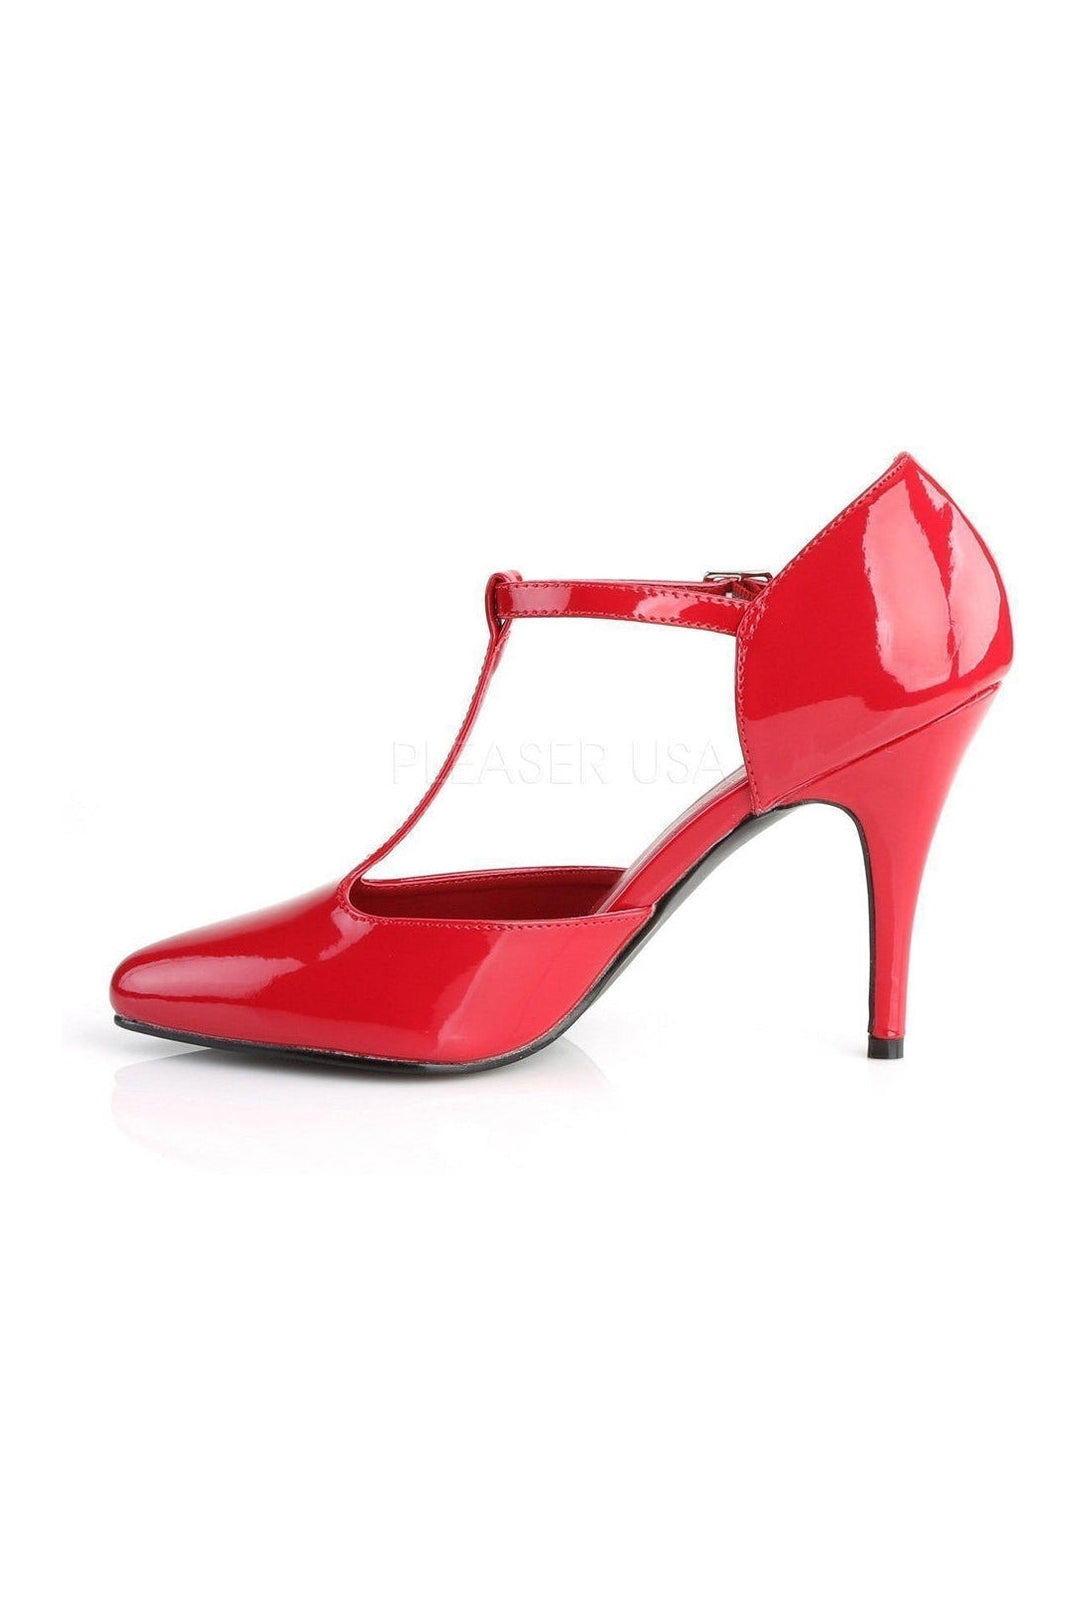 VANITY-415 Pump | Red Patent-Pleaser-D'Orsays-SEXYSHOES.COM